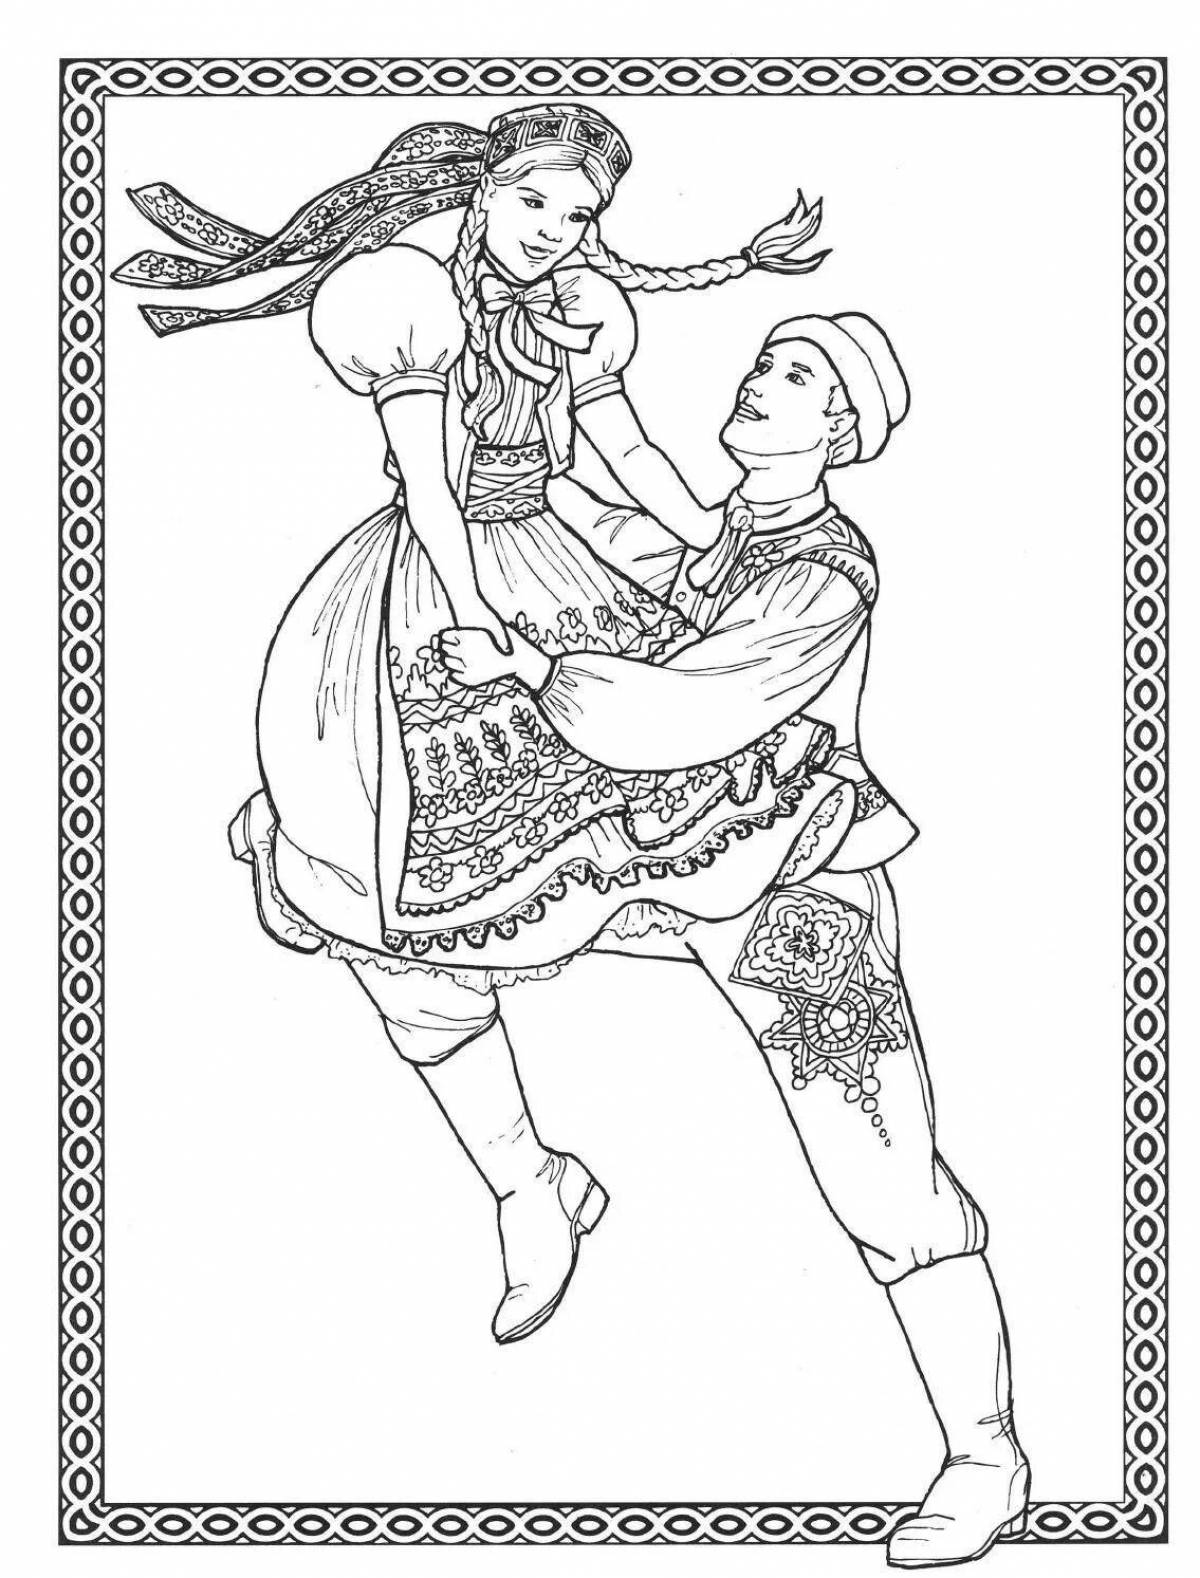 Coloring page incendiary Russian dance